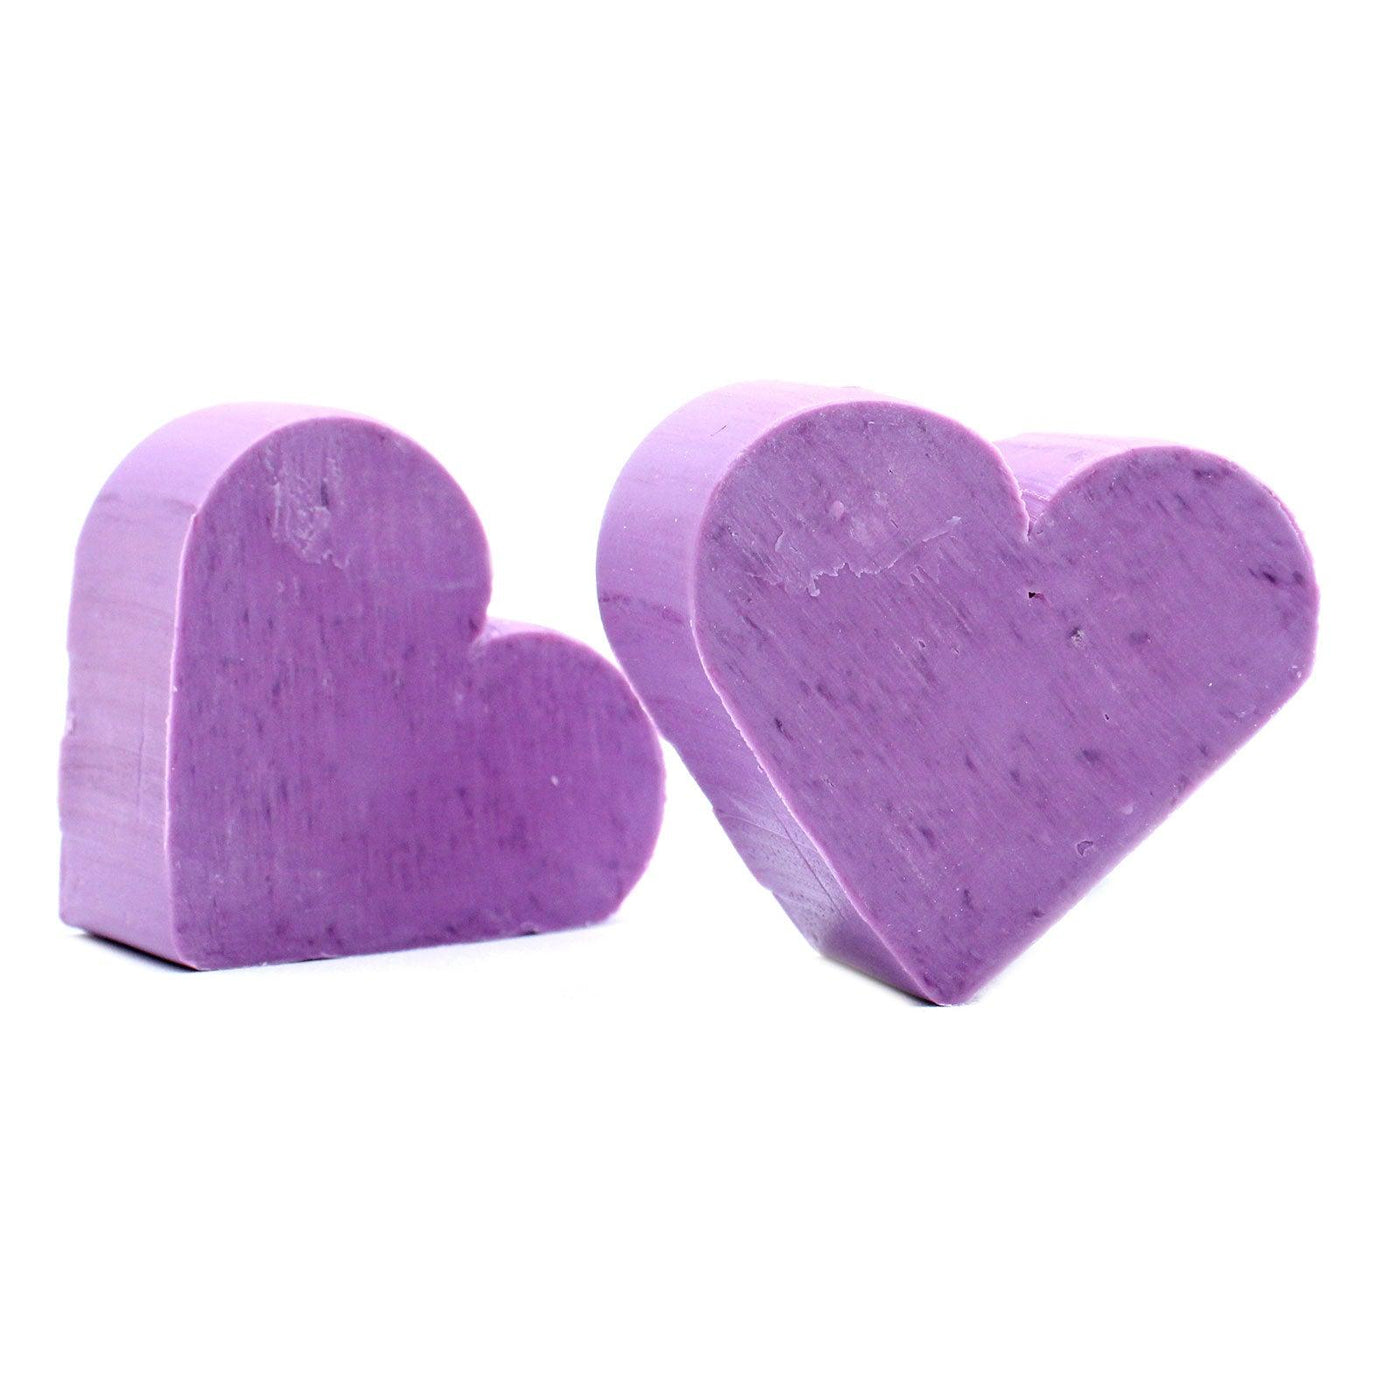 10x Lilac Heart Shaped Paraben Free Fragranced Guest Soap - Lavender.